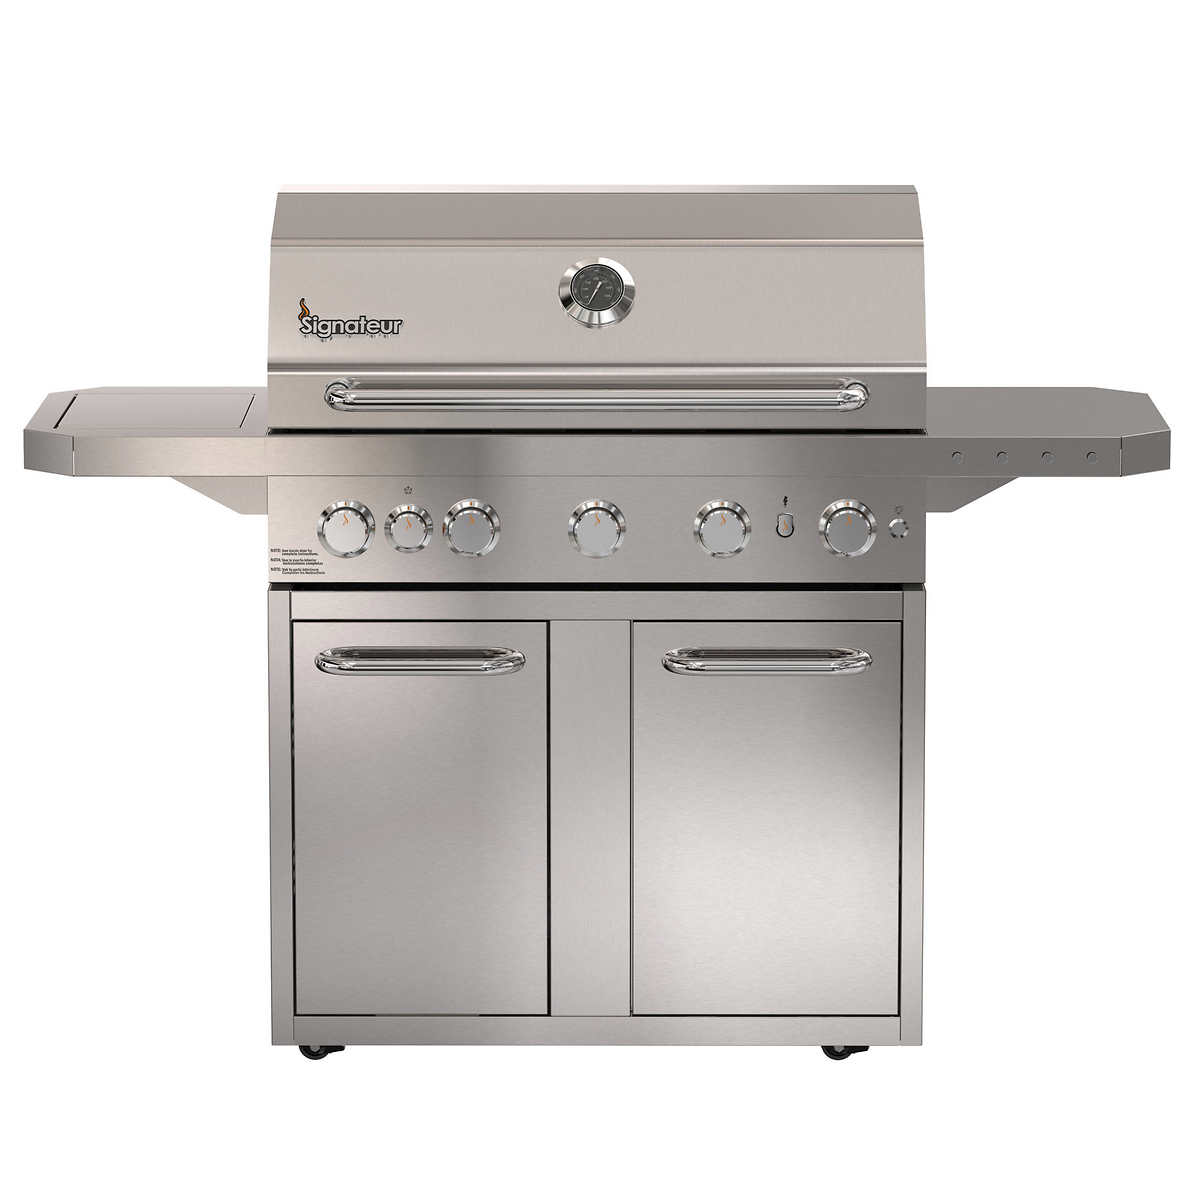 Signateur 5Burner 62,000 BTUs Grill 802 sq. inch Cooking Area Cover Included eBay